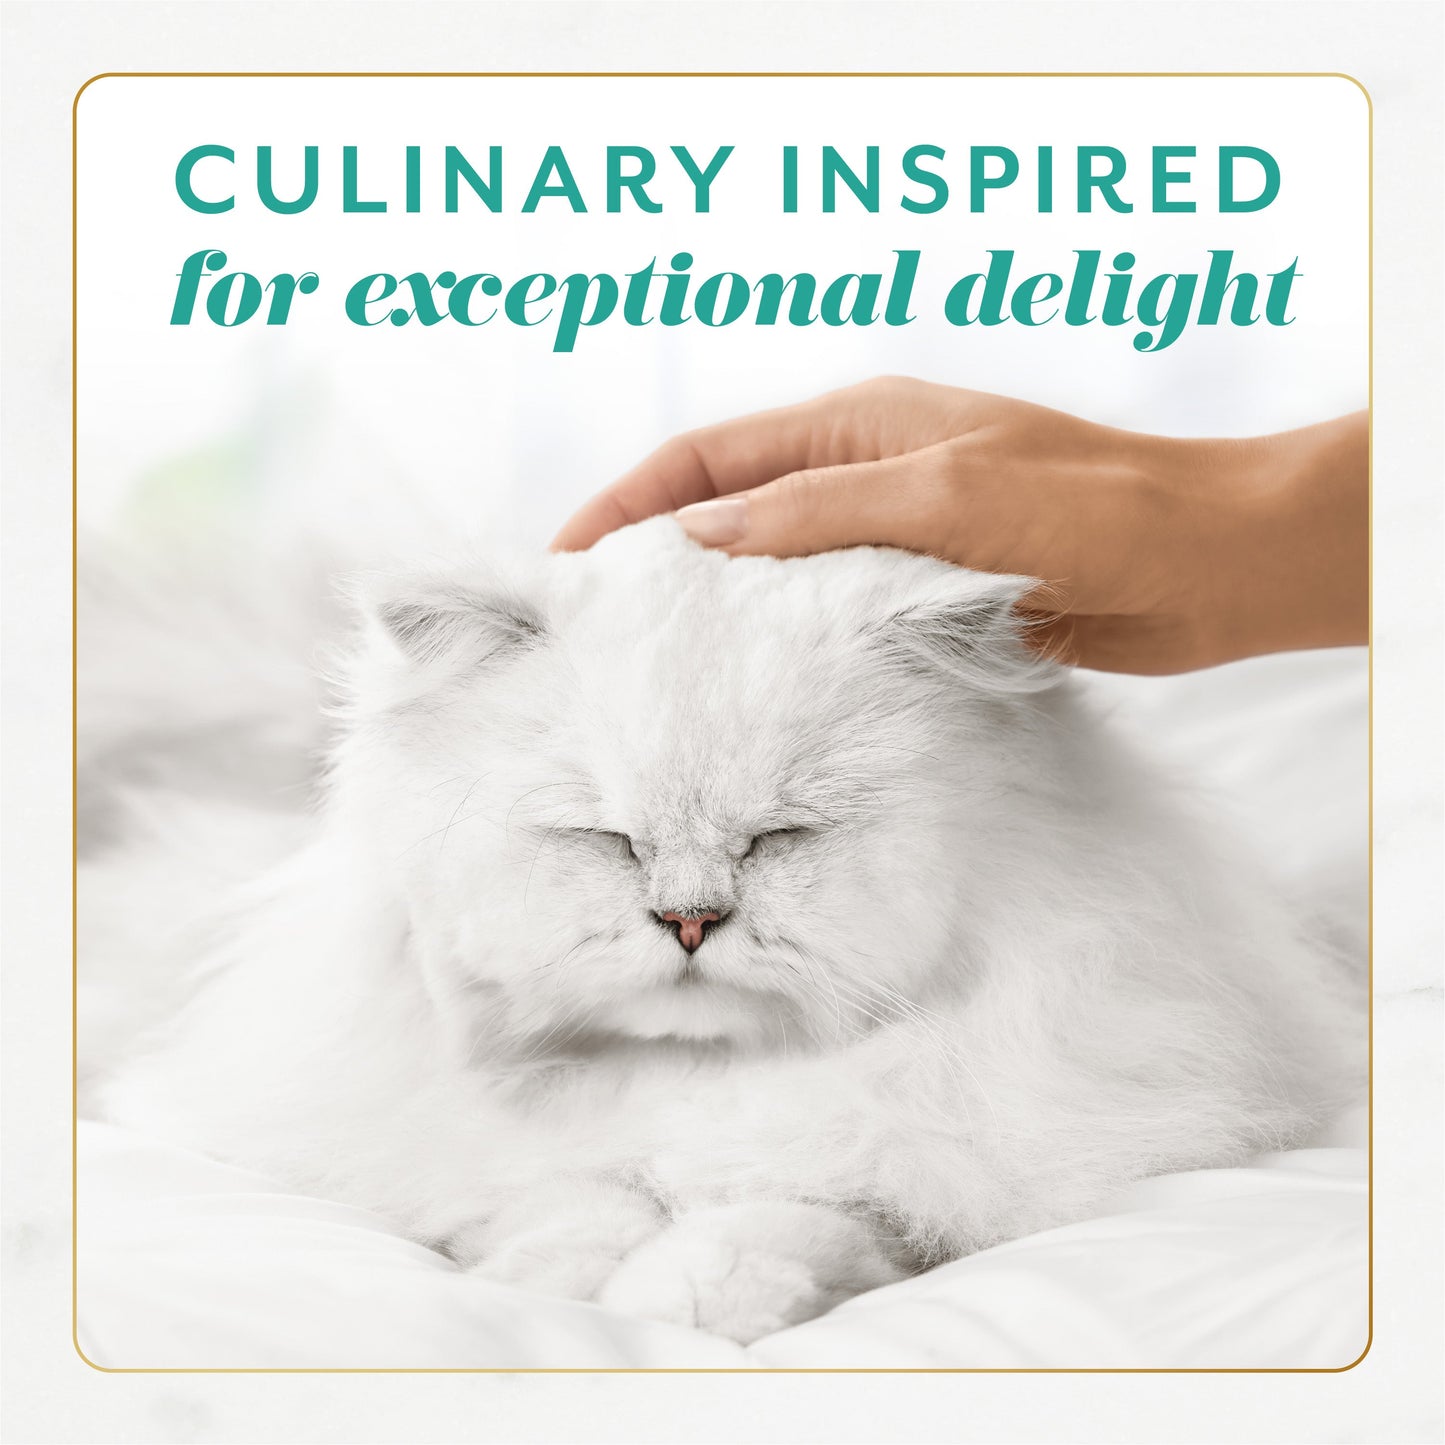 Culinary inspired for exceptional delight